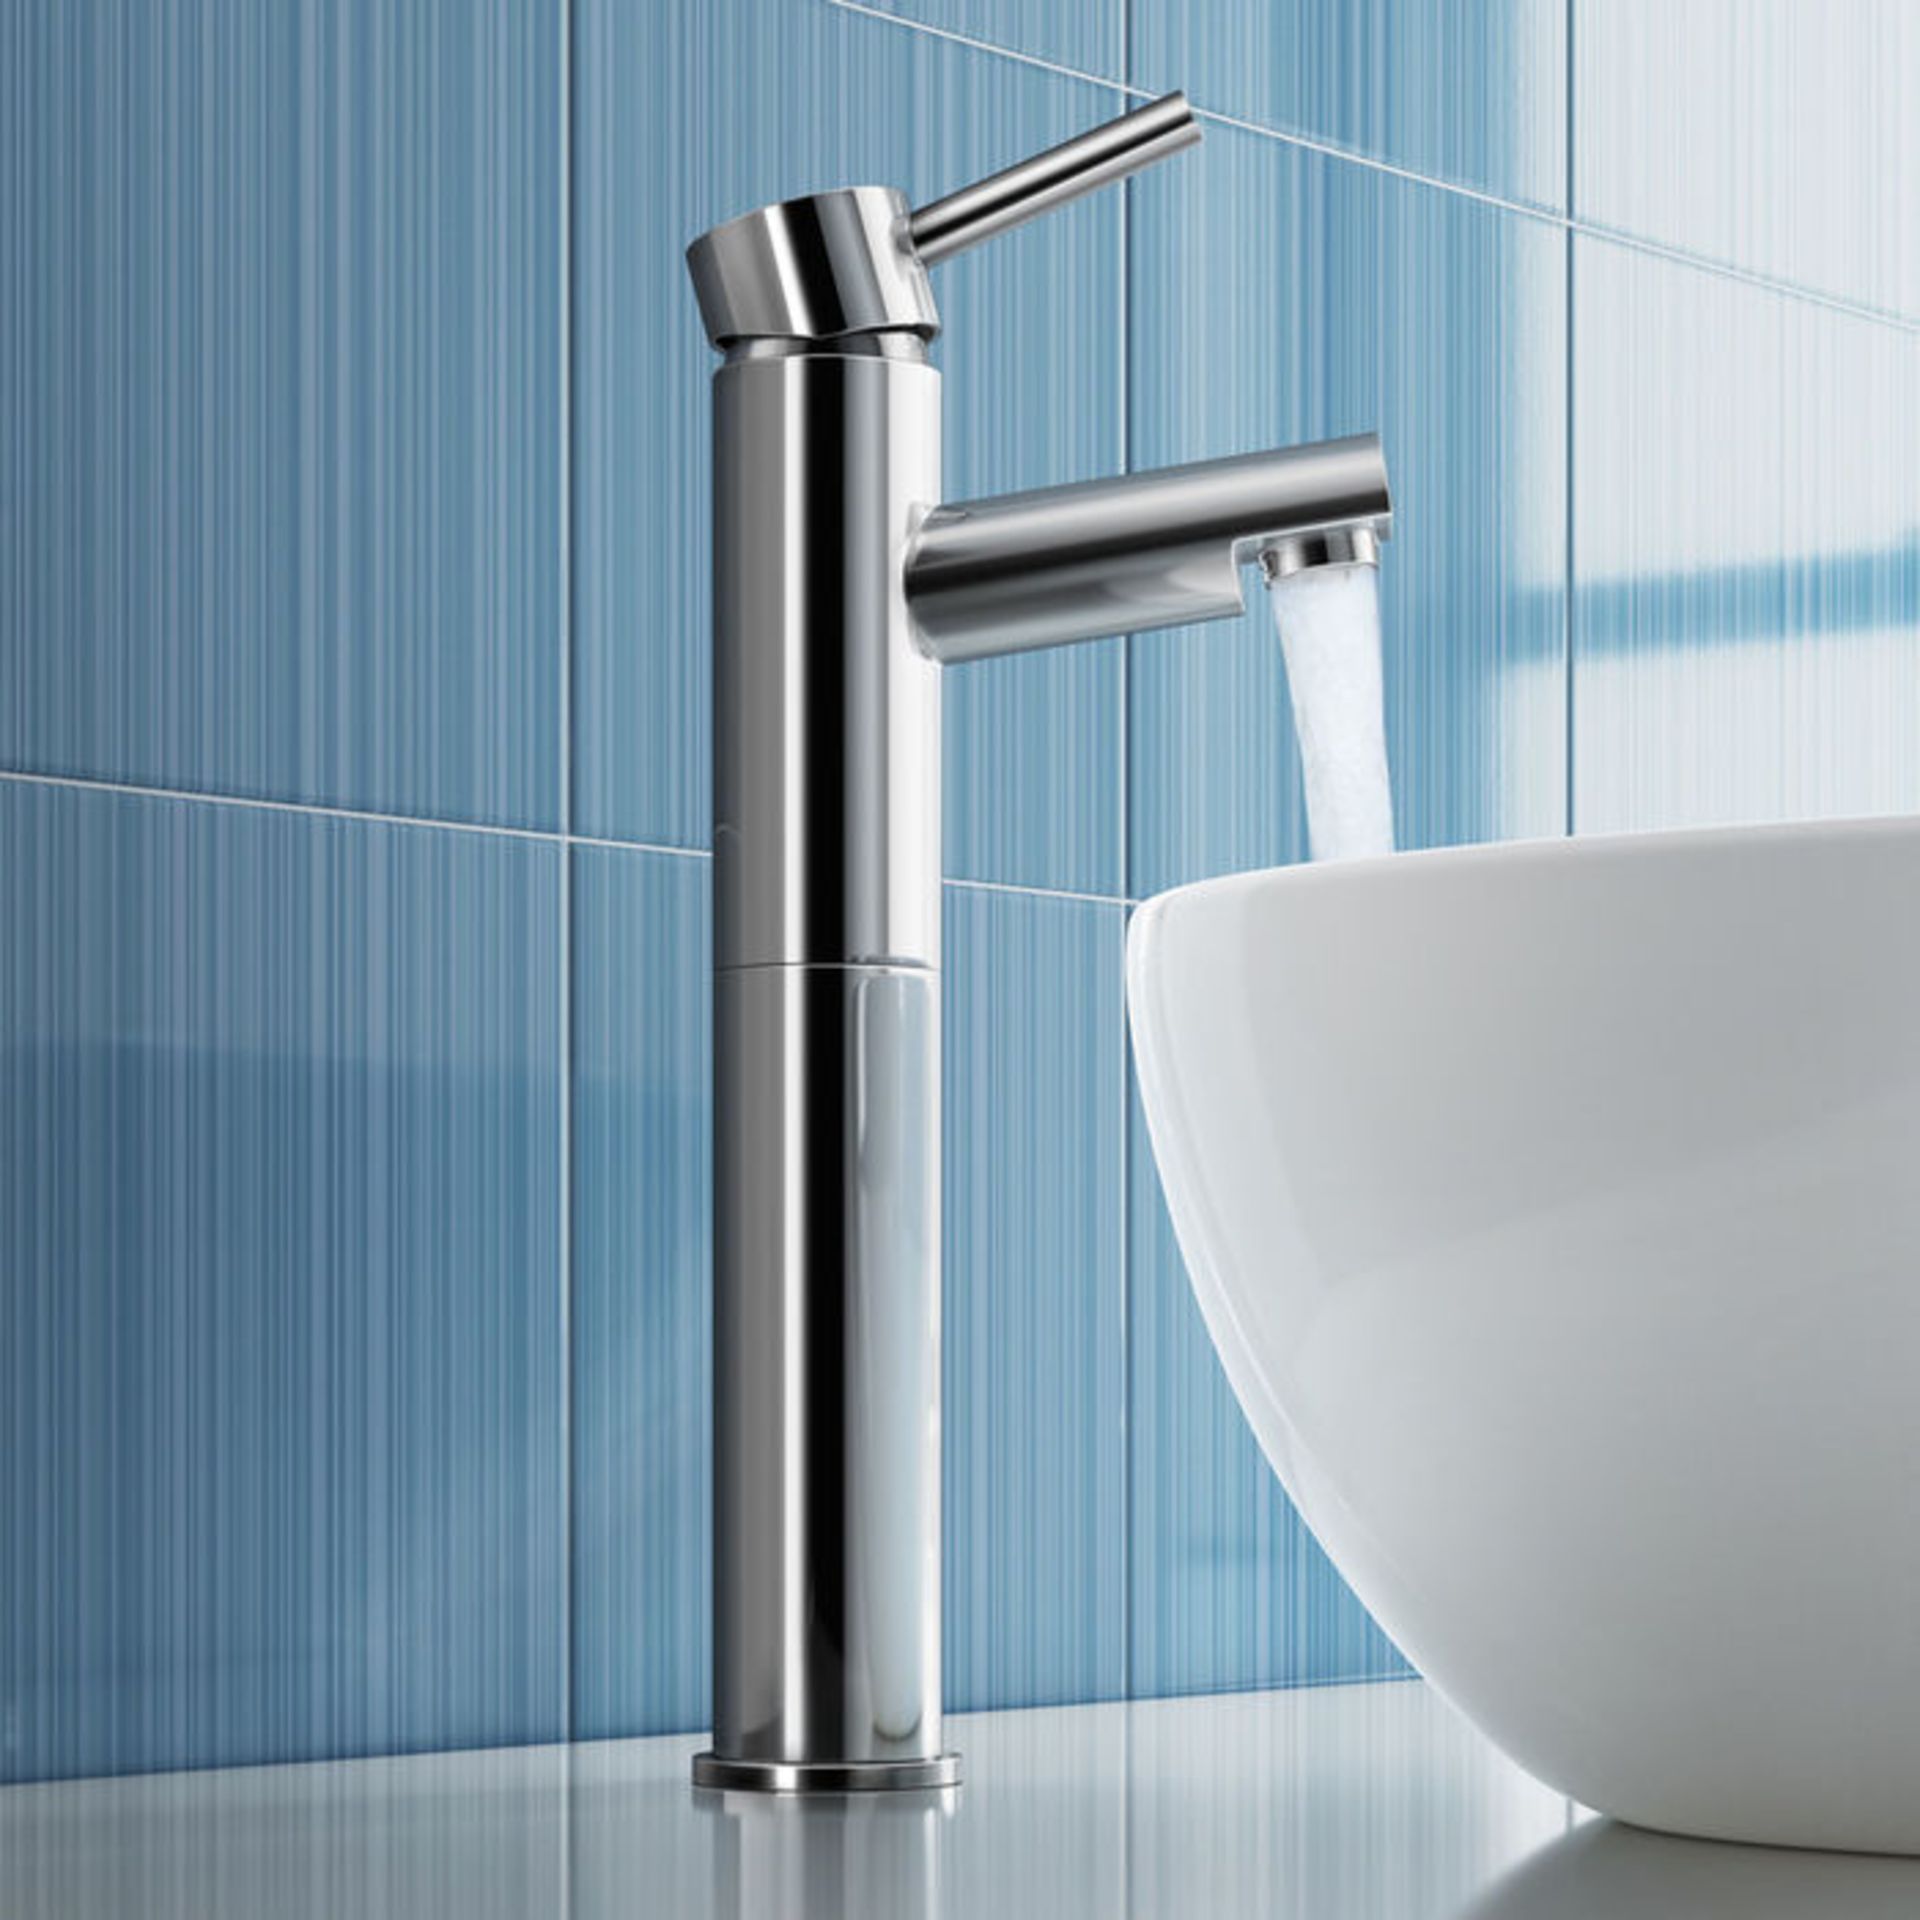 (P50) Gladstone II Counter Top Basin Mixer Tap The gorgeous Gladstone tap is crafted from anti-